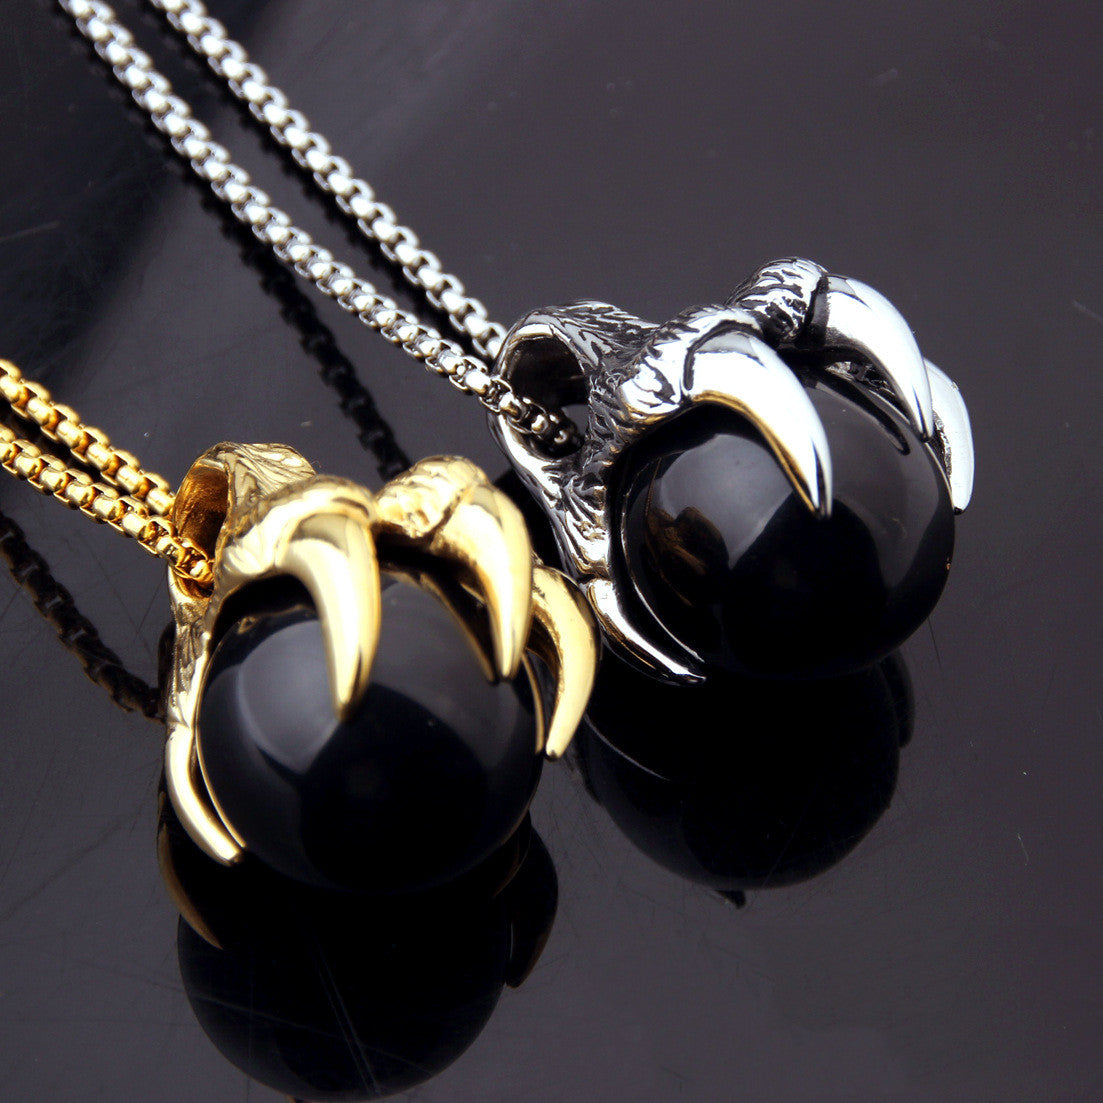 Stylish Stainless Steel Necklace for Men - Elevate Your Fashion Game!